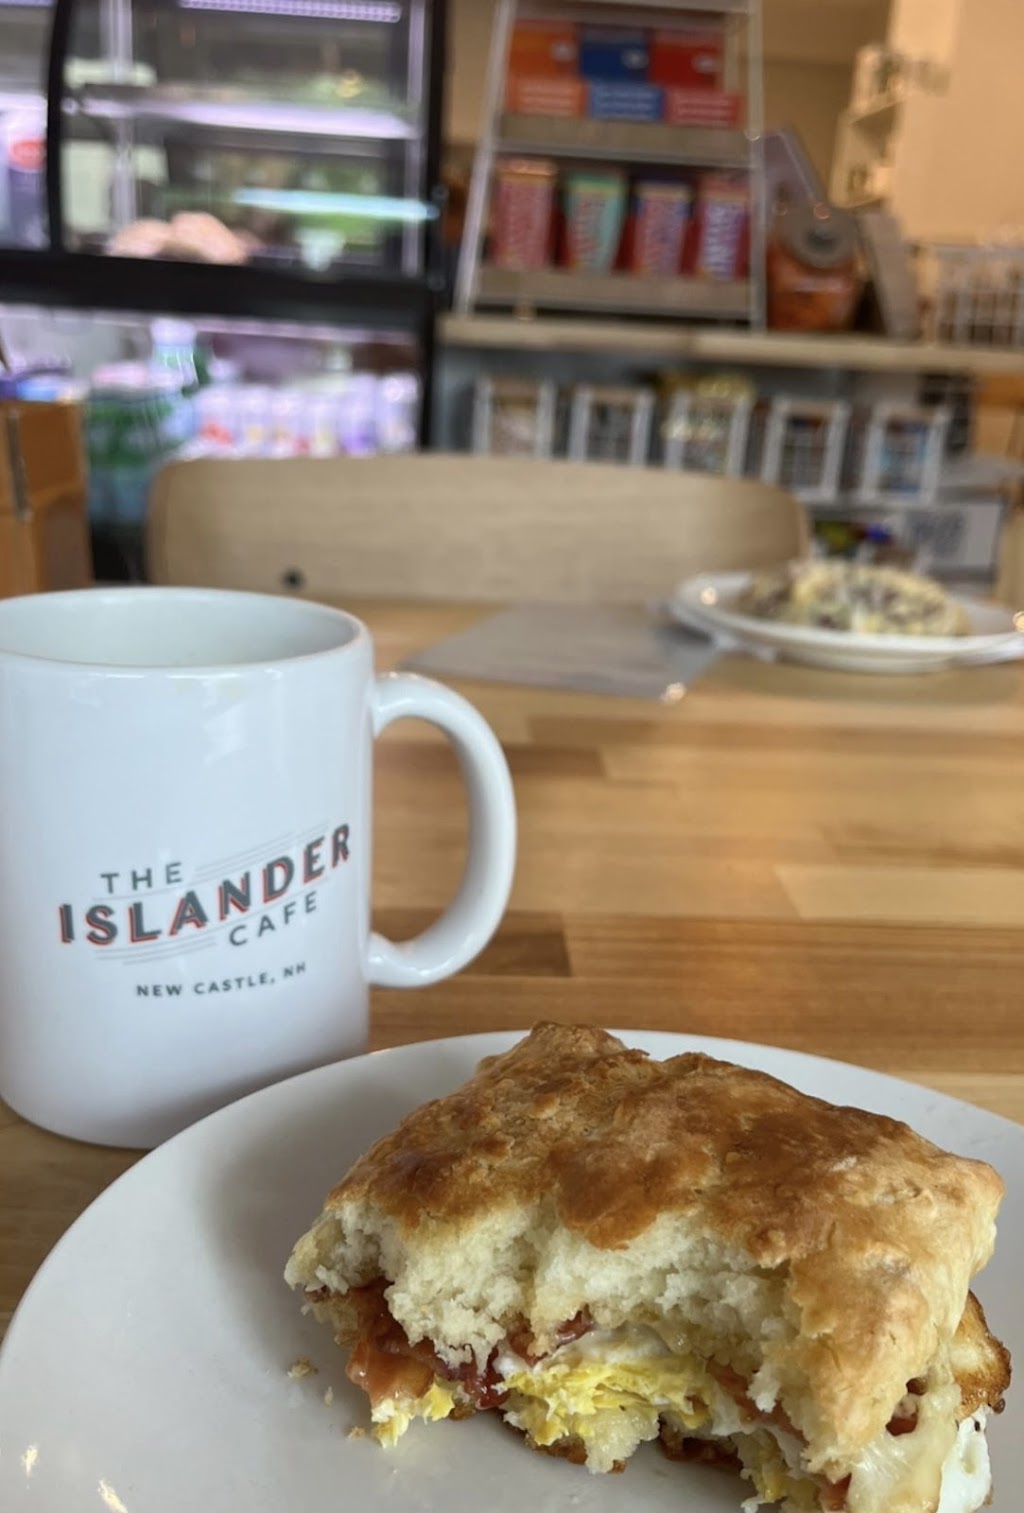 The Islander Cafe | cafe | 52 Main St, New Castle, NH 03854, USA | 6034333344 OR +1 603-433-3344